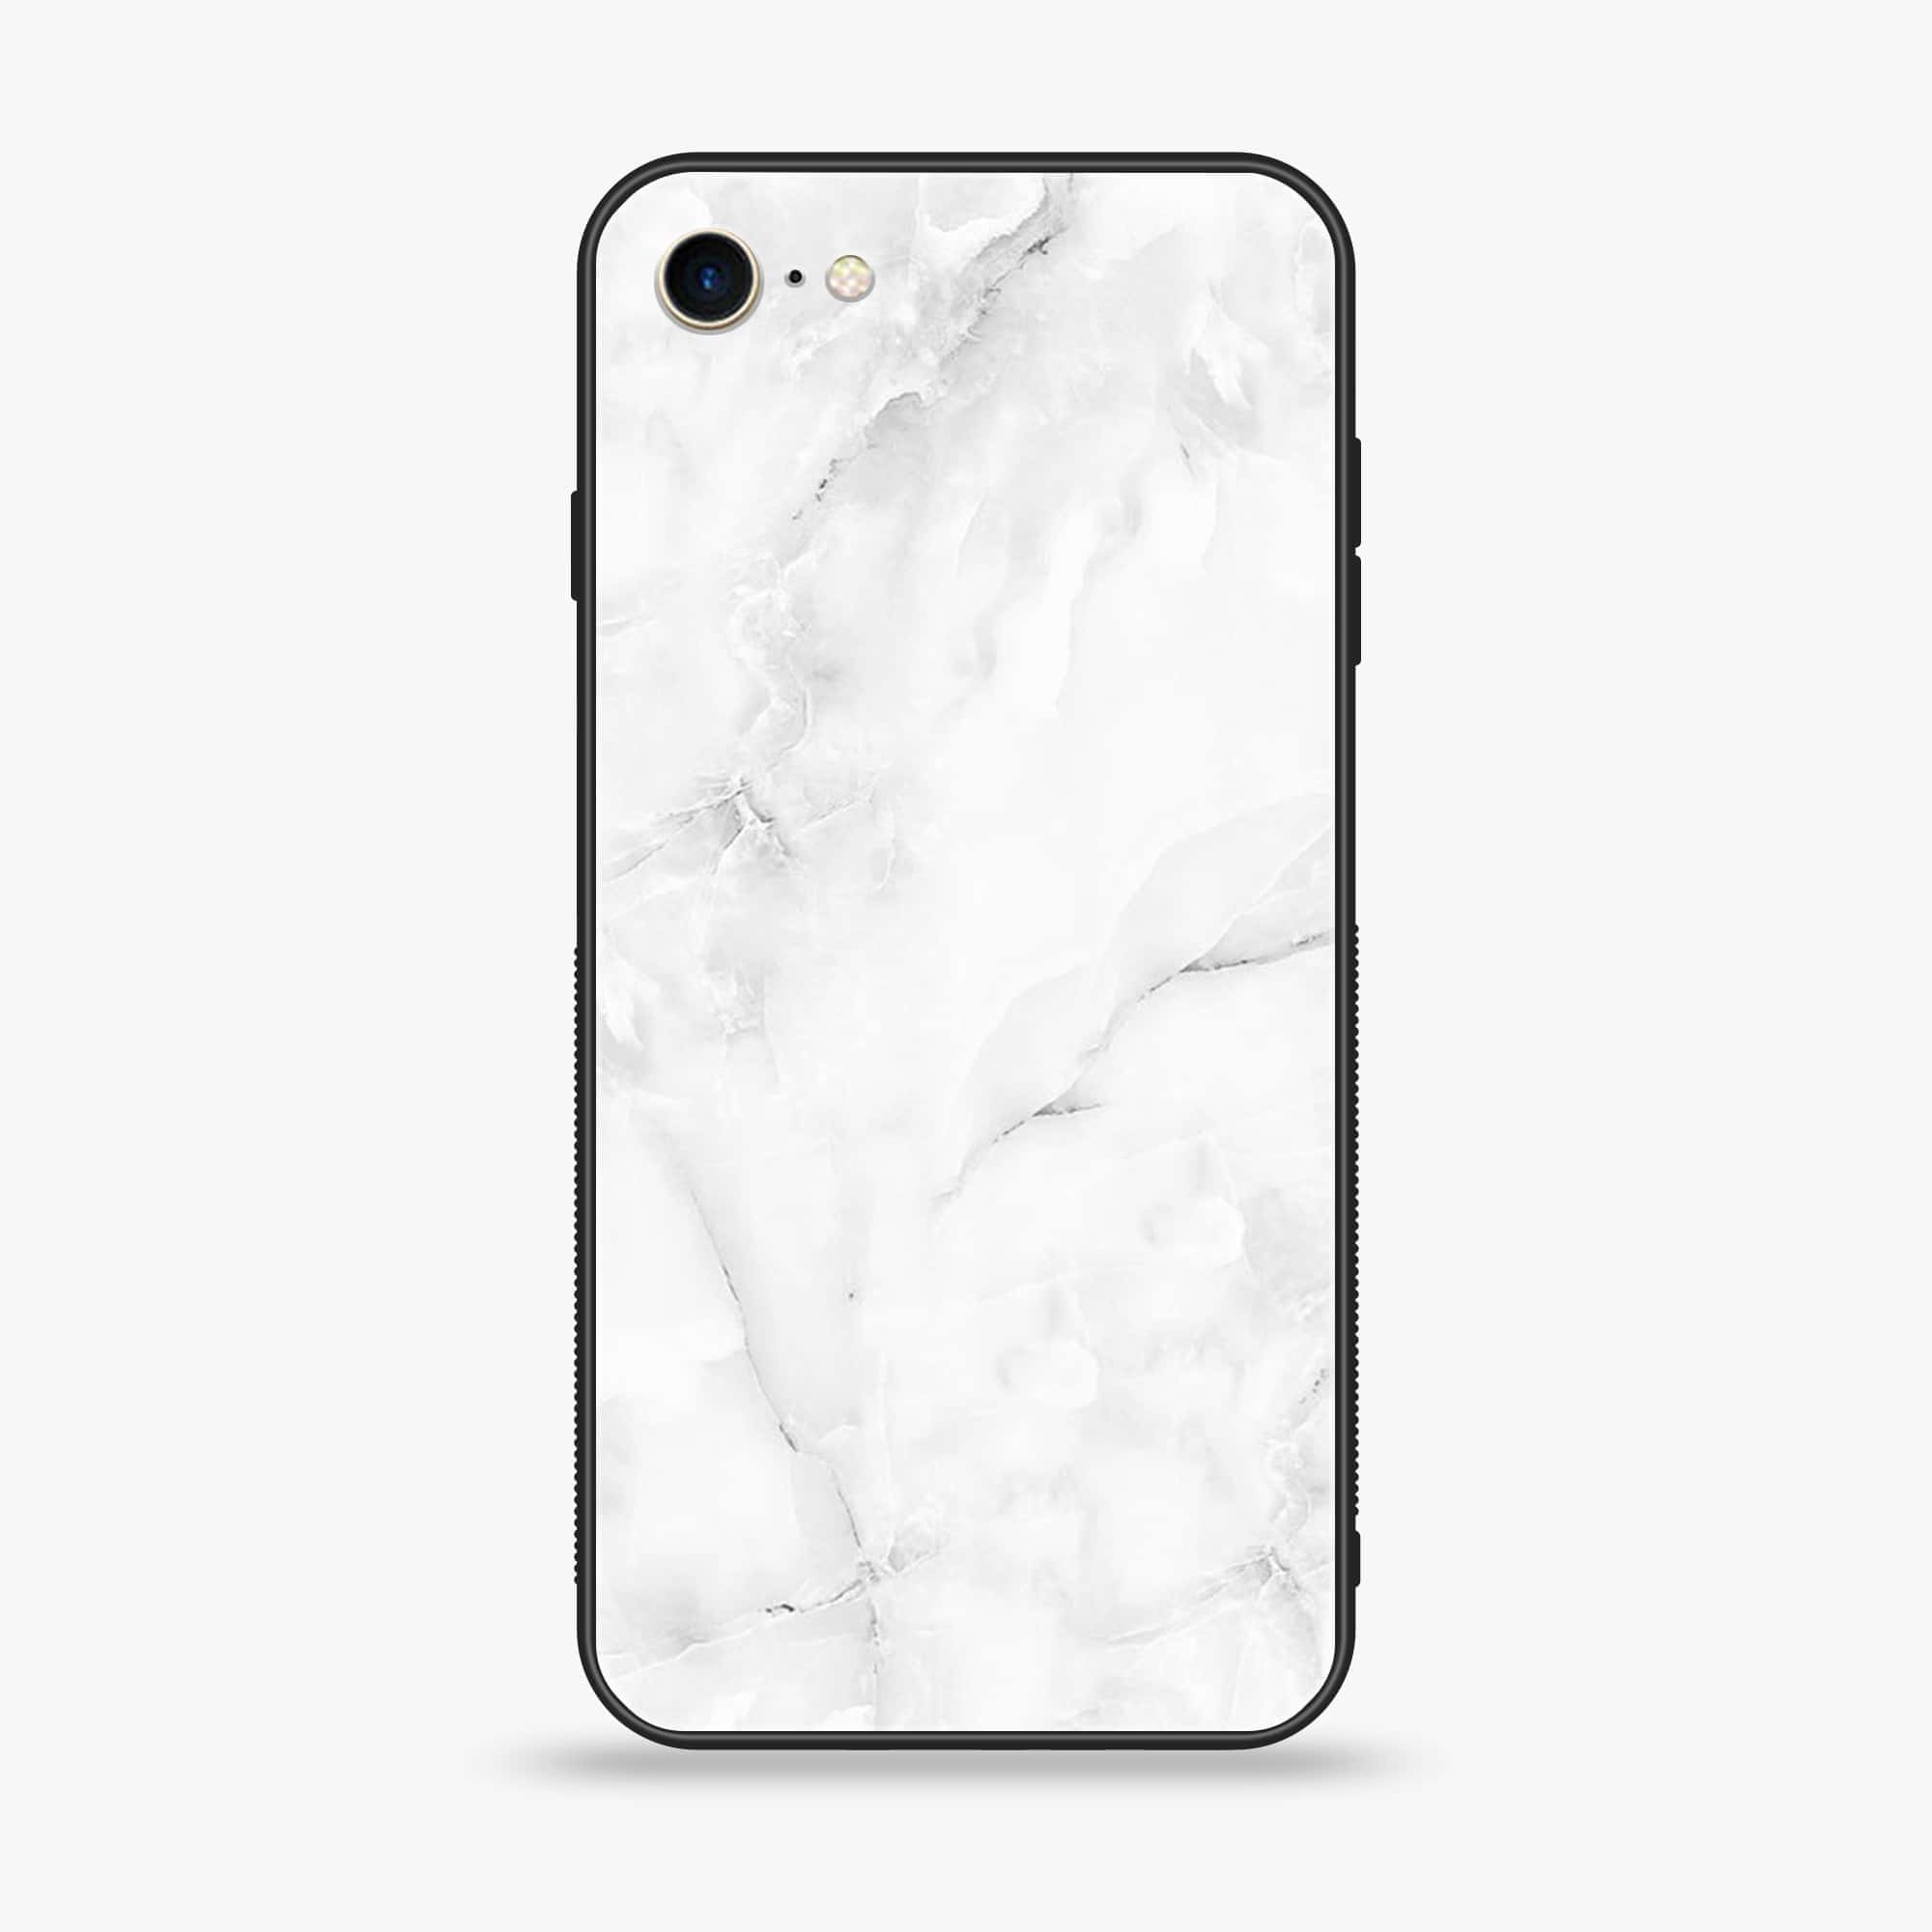 iPhone 8 - White Marble Series - Premium Printed Glass soft Bumper shock Proof Case